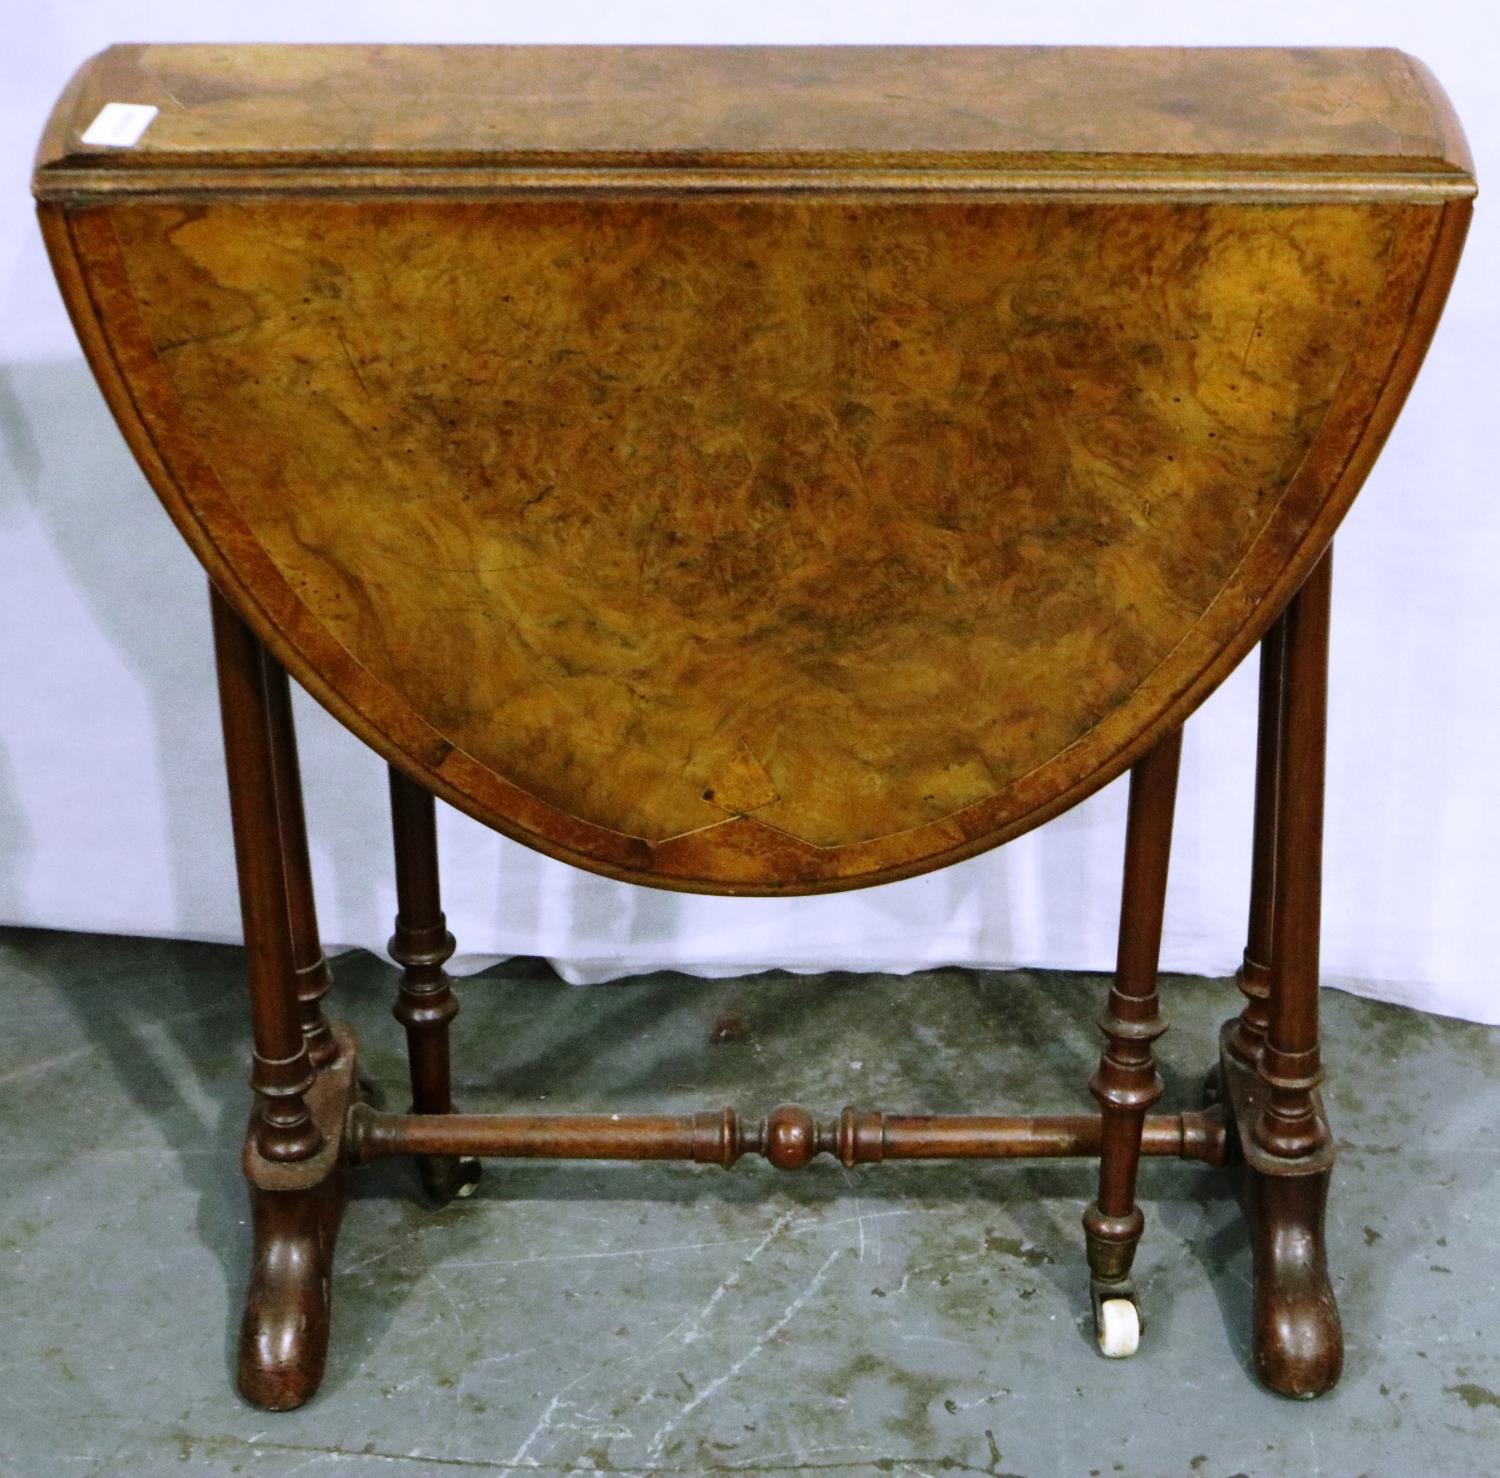 A Victorian burr walnut inlaid Sutherland table with carved and turned supports, 82 x 61 x 64 cm - Image 3 of 3